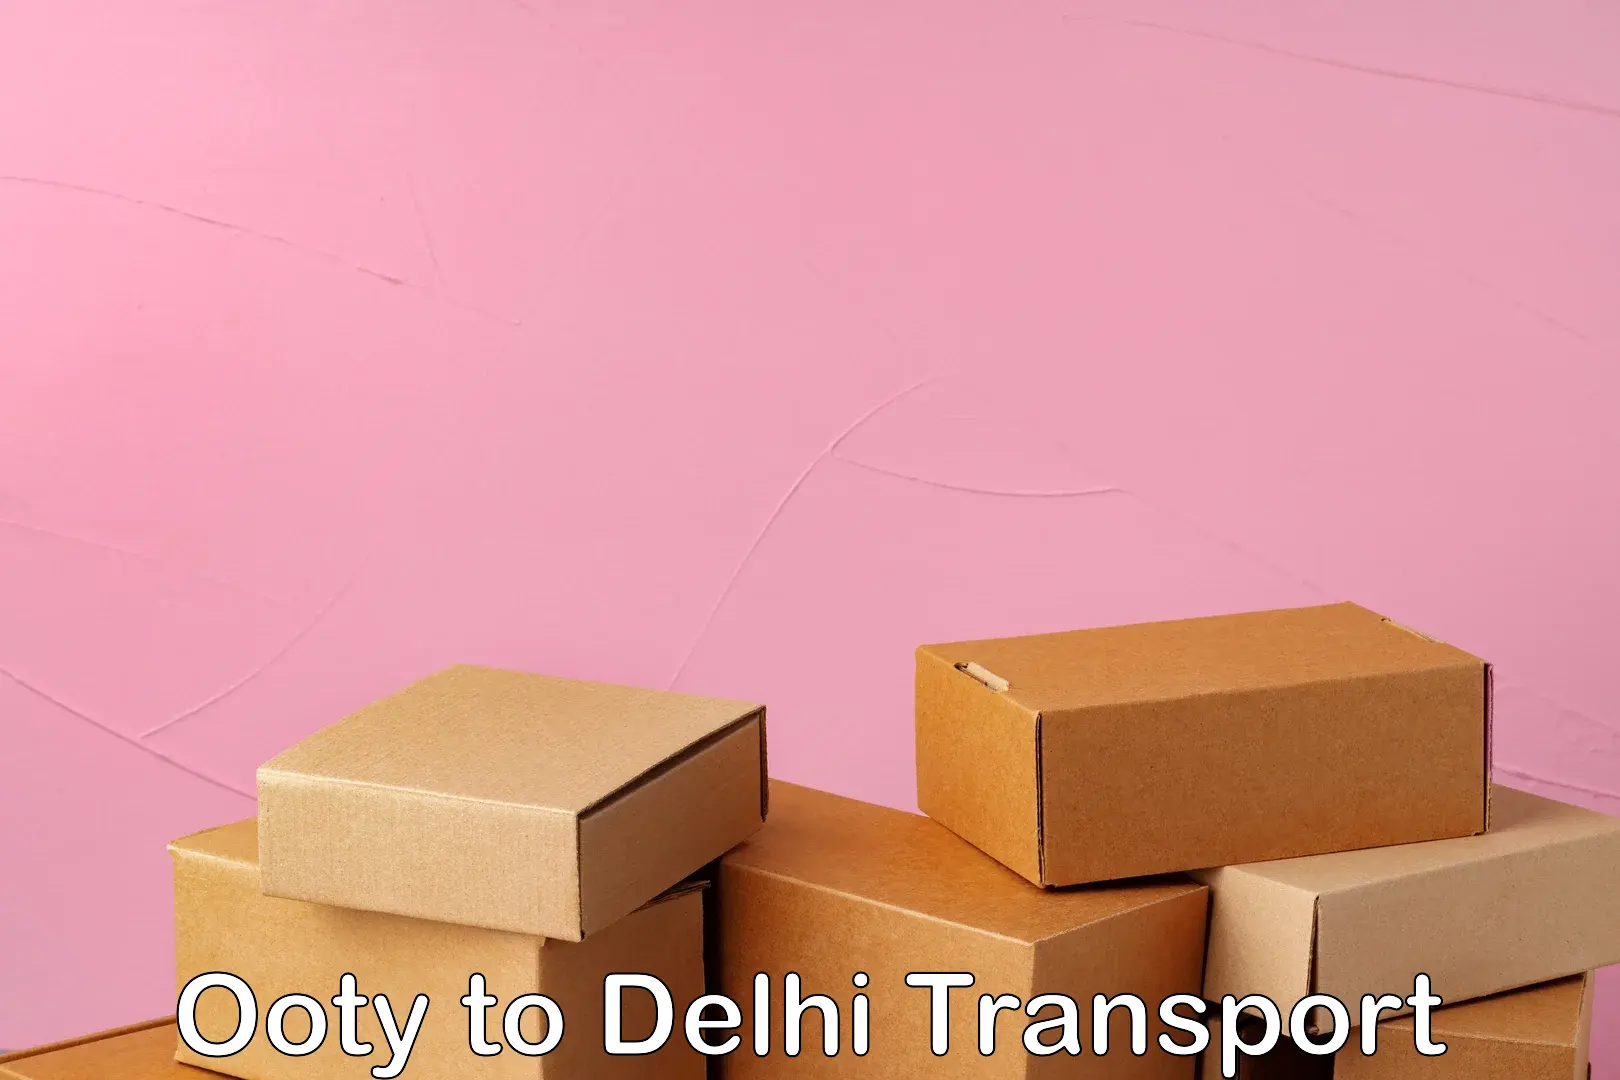 Vehicle transport services Ooty to Delhi